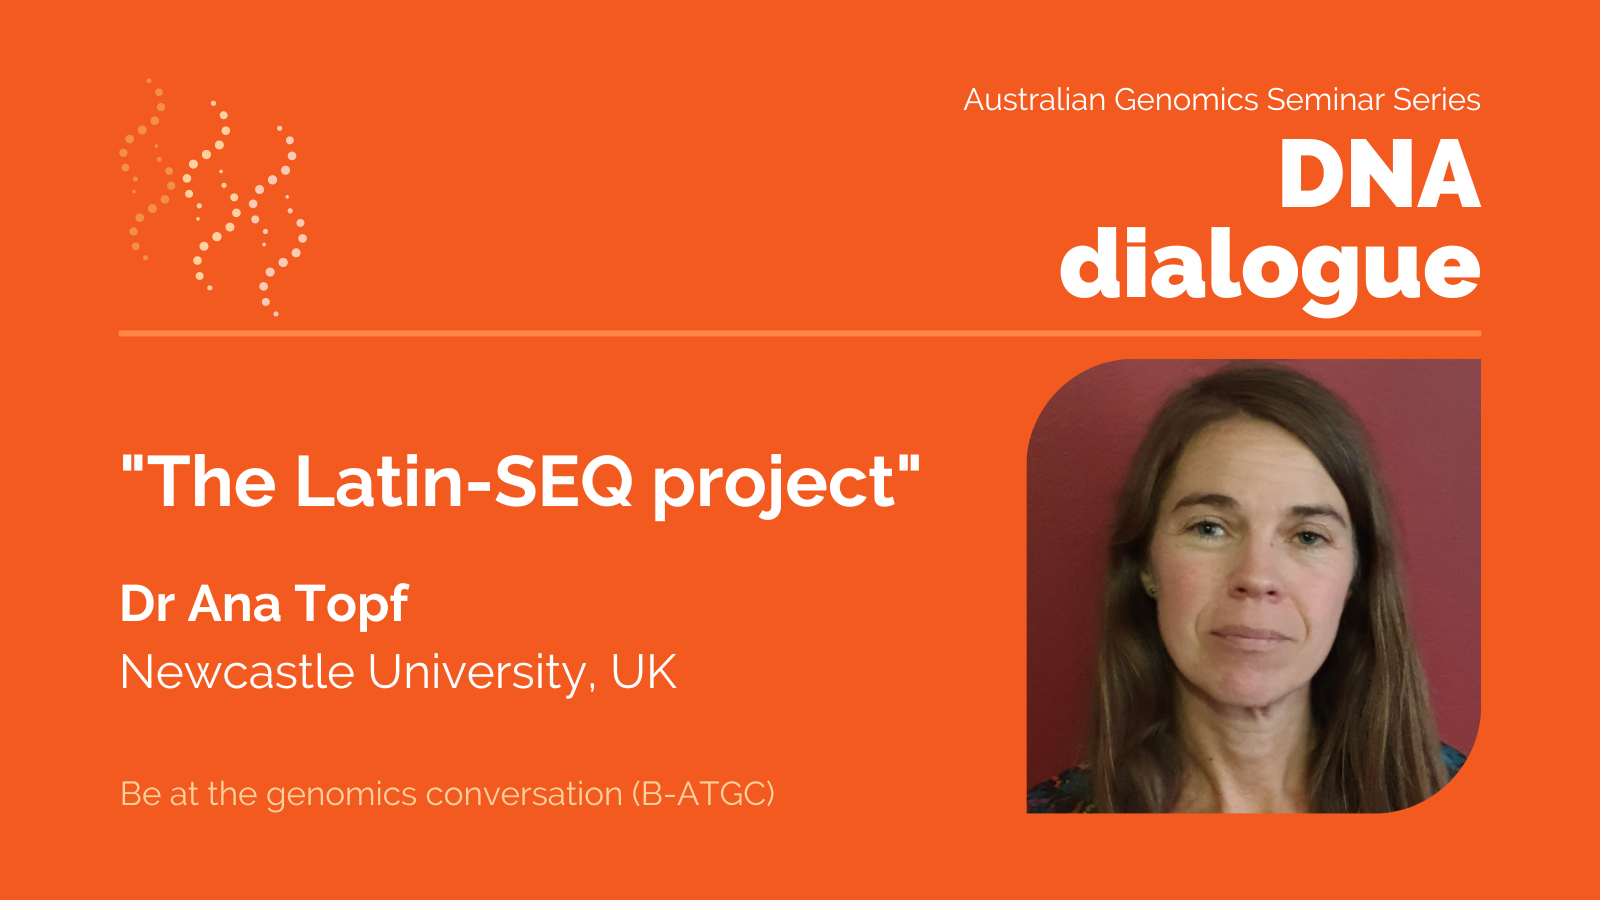 DNA dialogue seminar on 27 June 2024 at 4pm (AEST) - "The Latin-SEQ project" presented by Dr Ana Topf